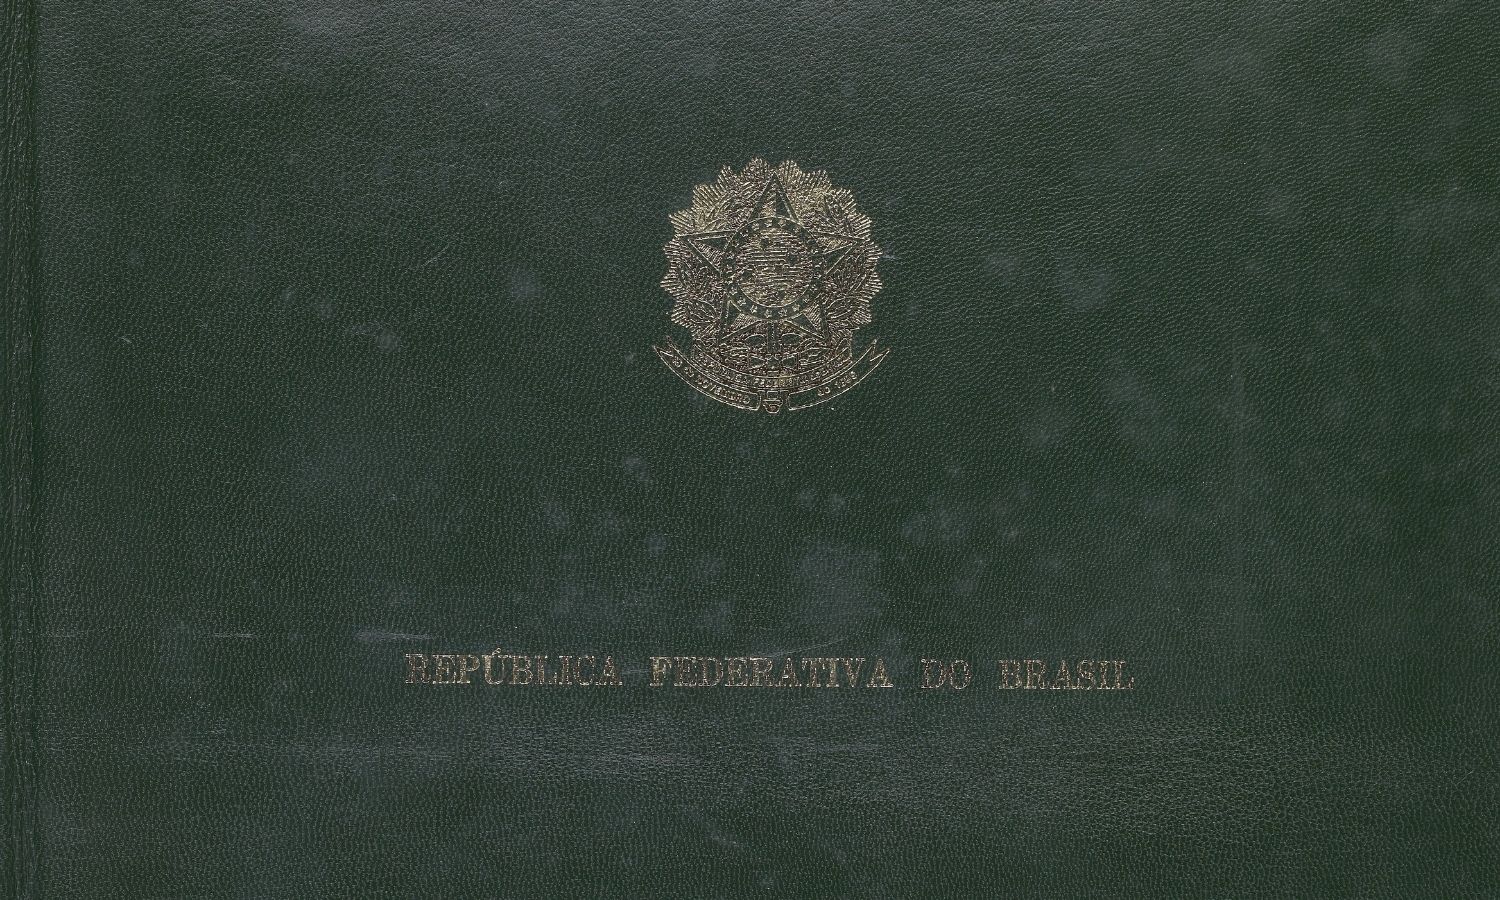 OTD in 1988: The Constitution of the Federative Republic of Brazil was ratified.